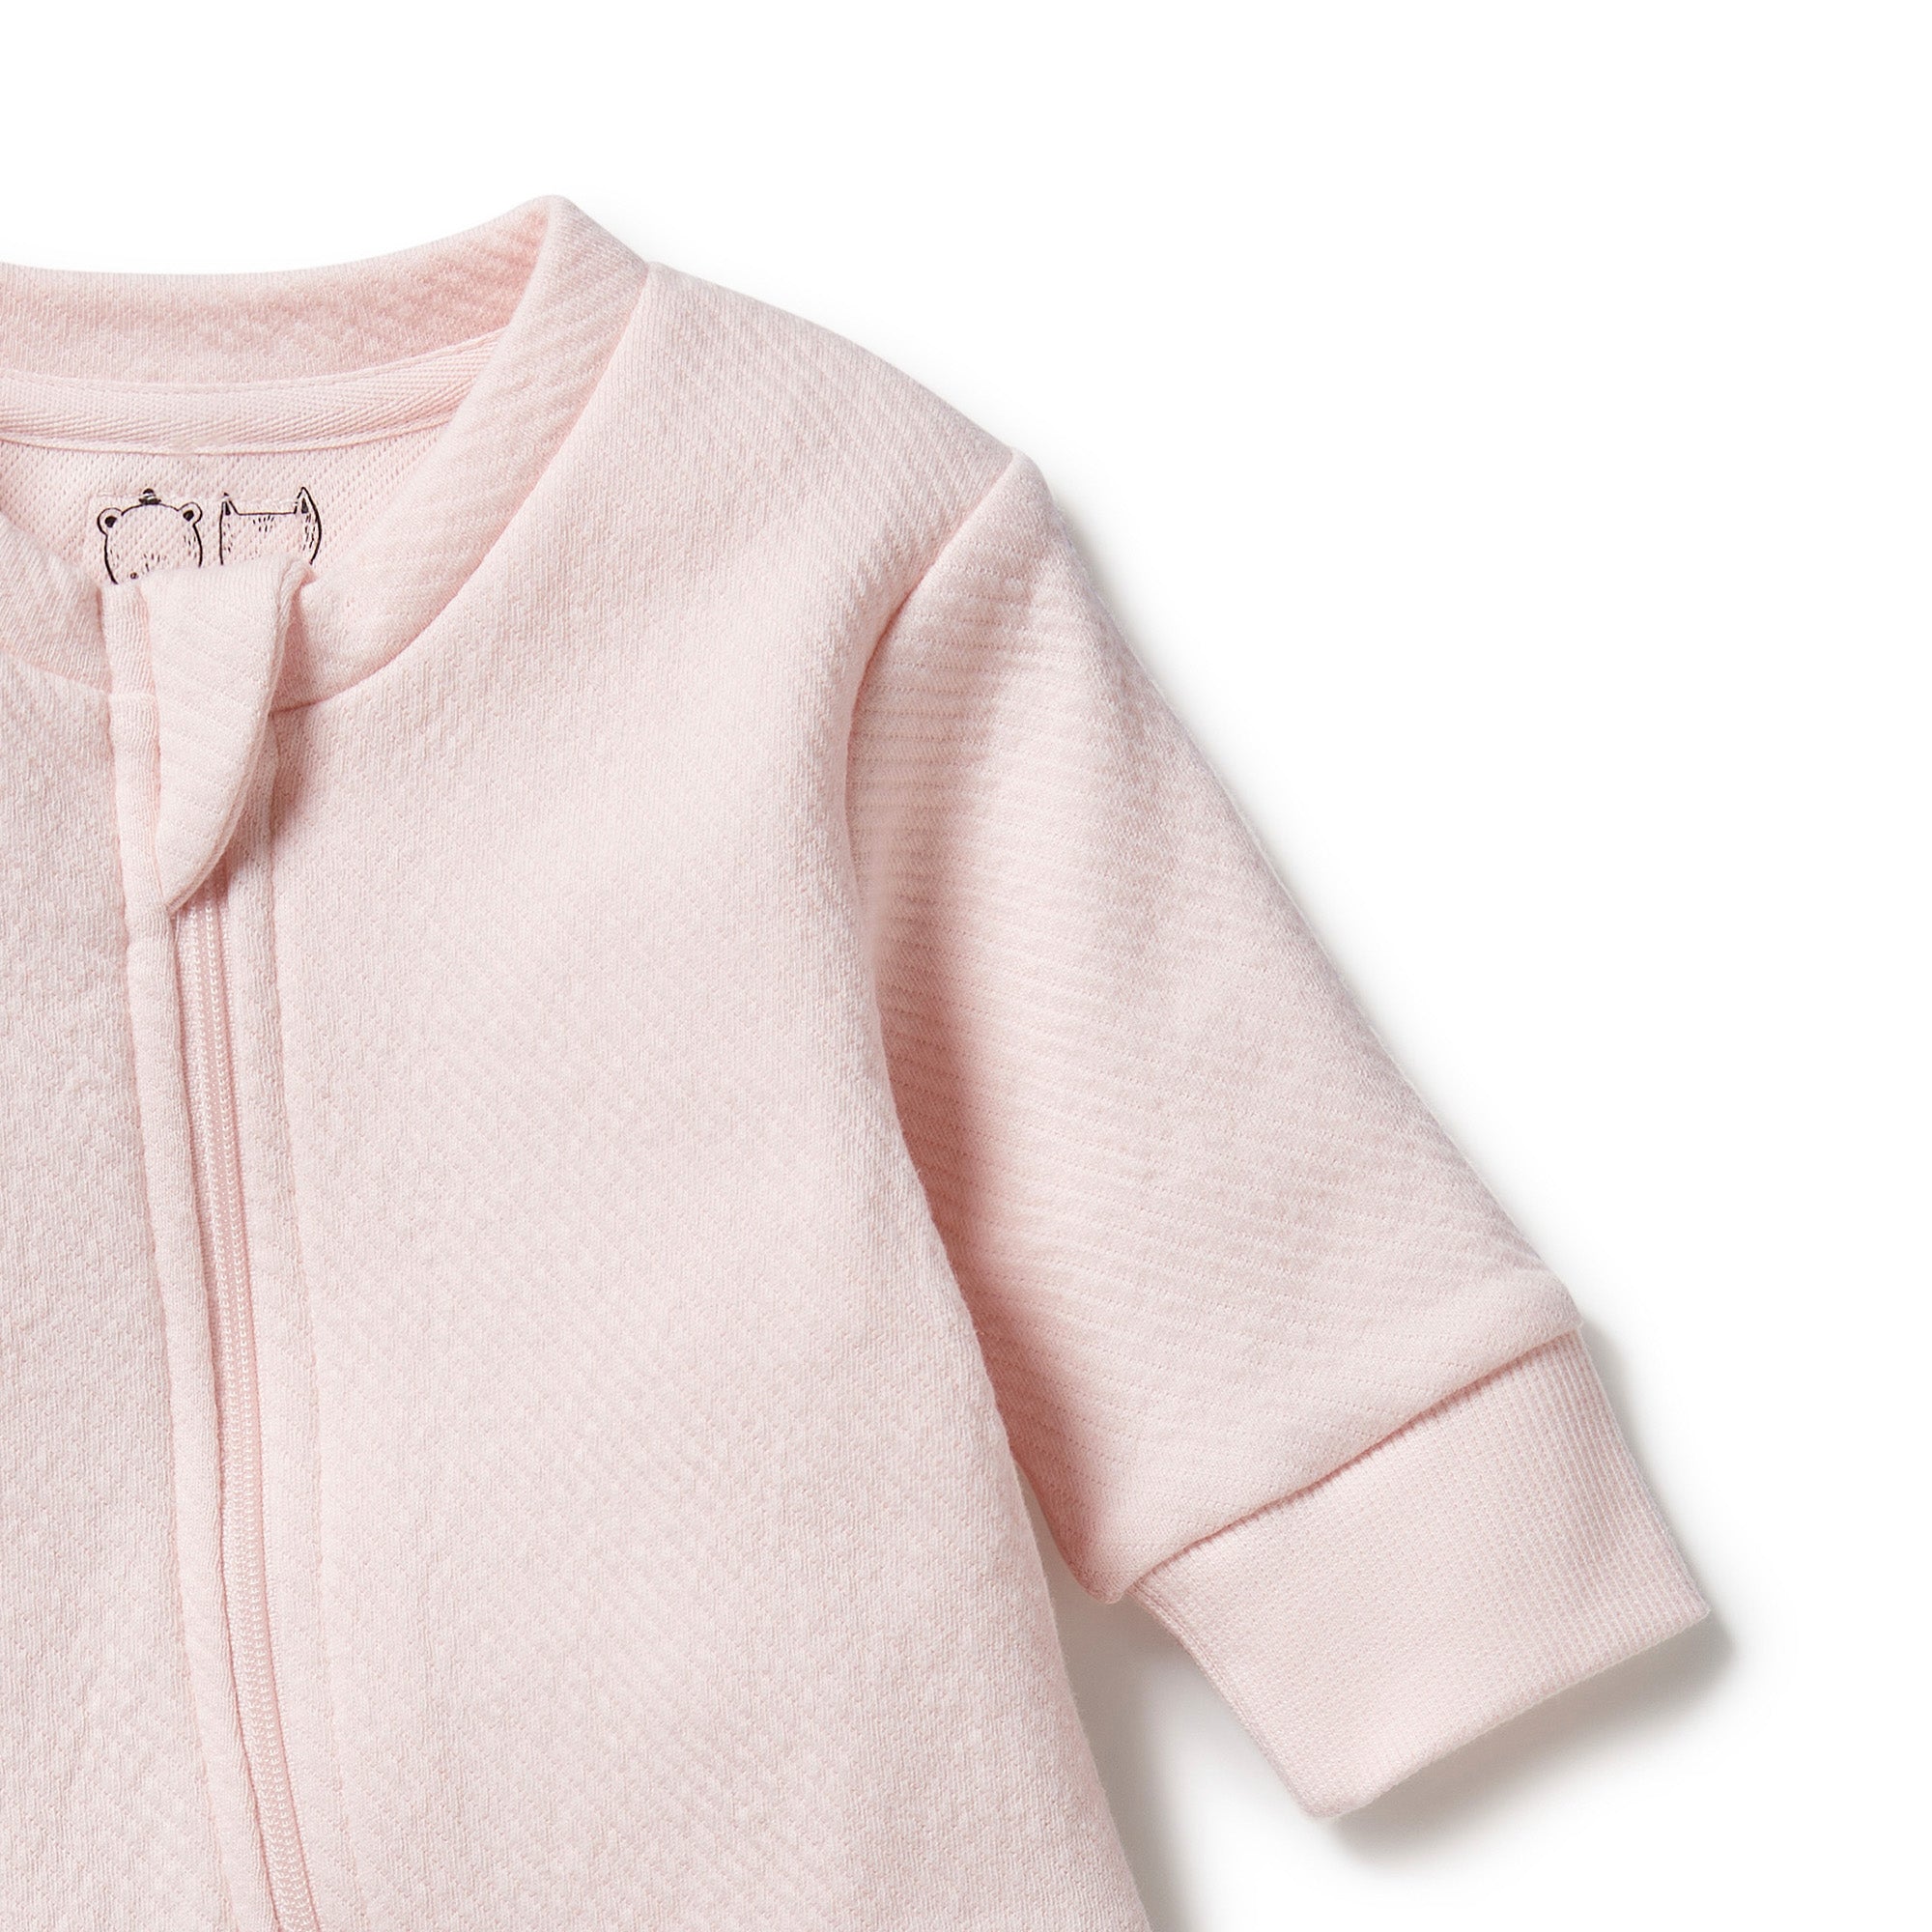 Wilson & Frenchy - Pink Organic Quilted Growsuit